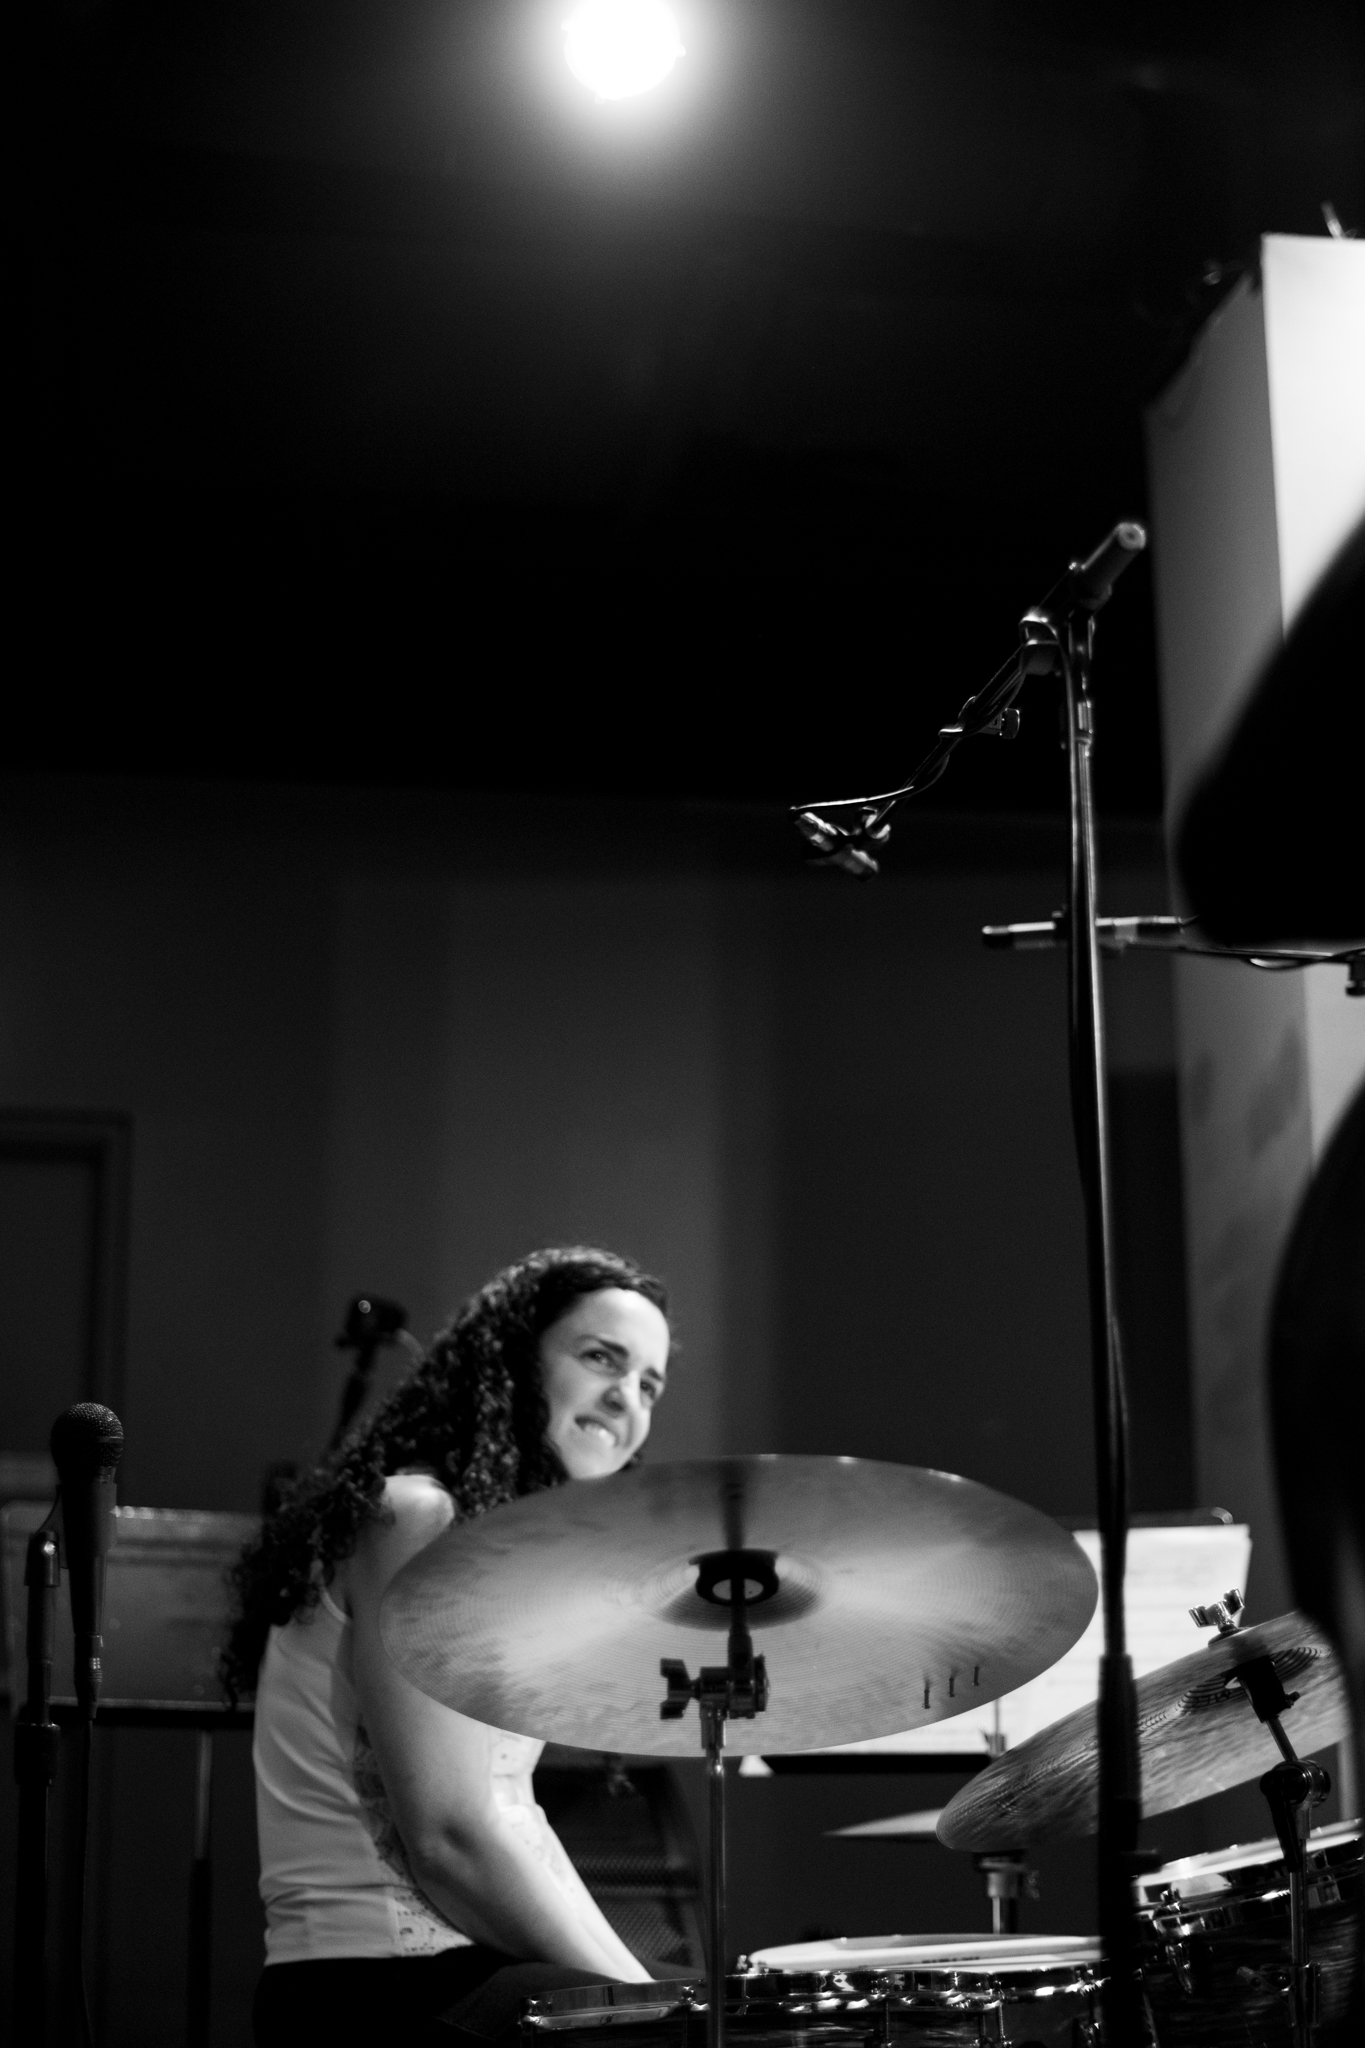 A young woman playing the drums